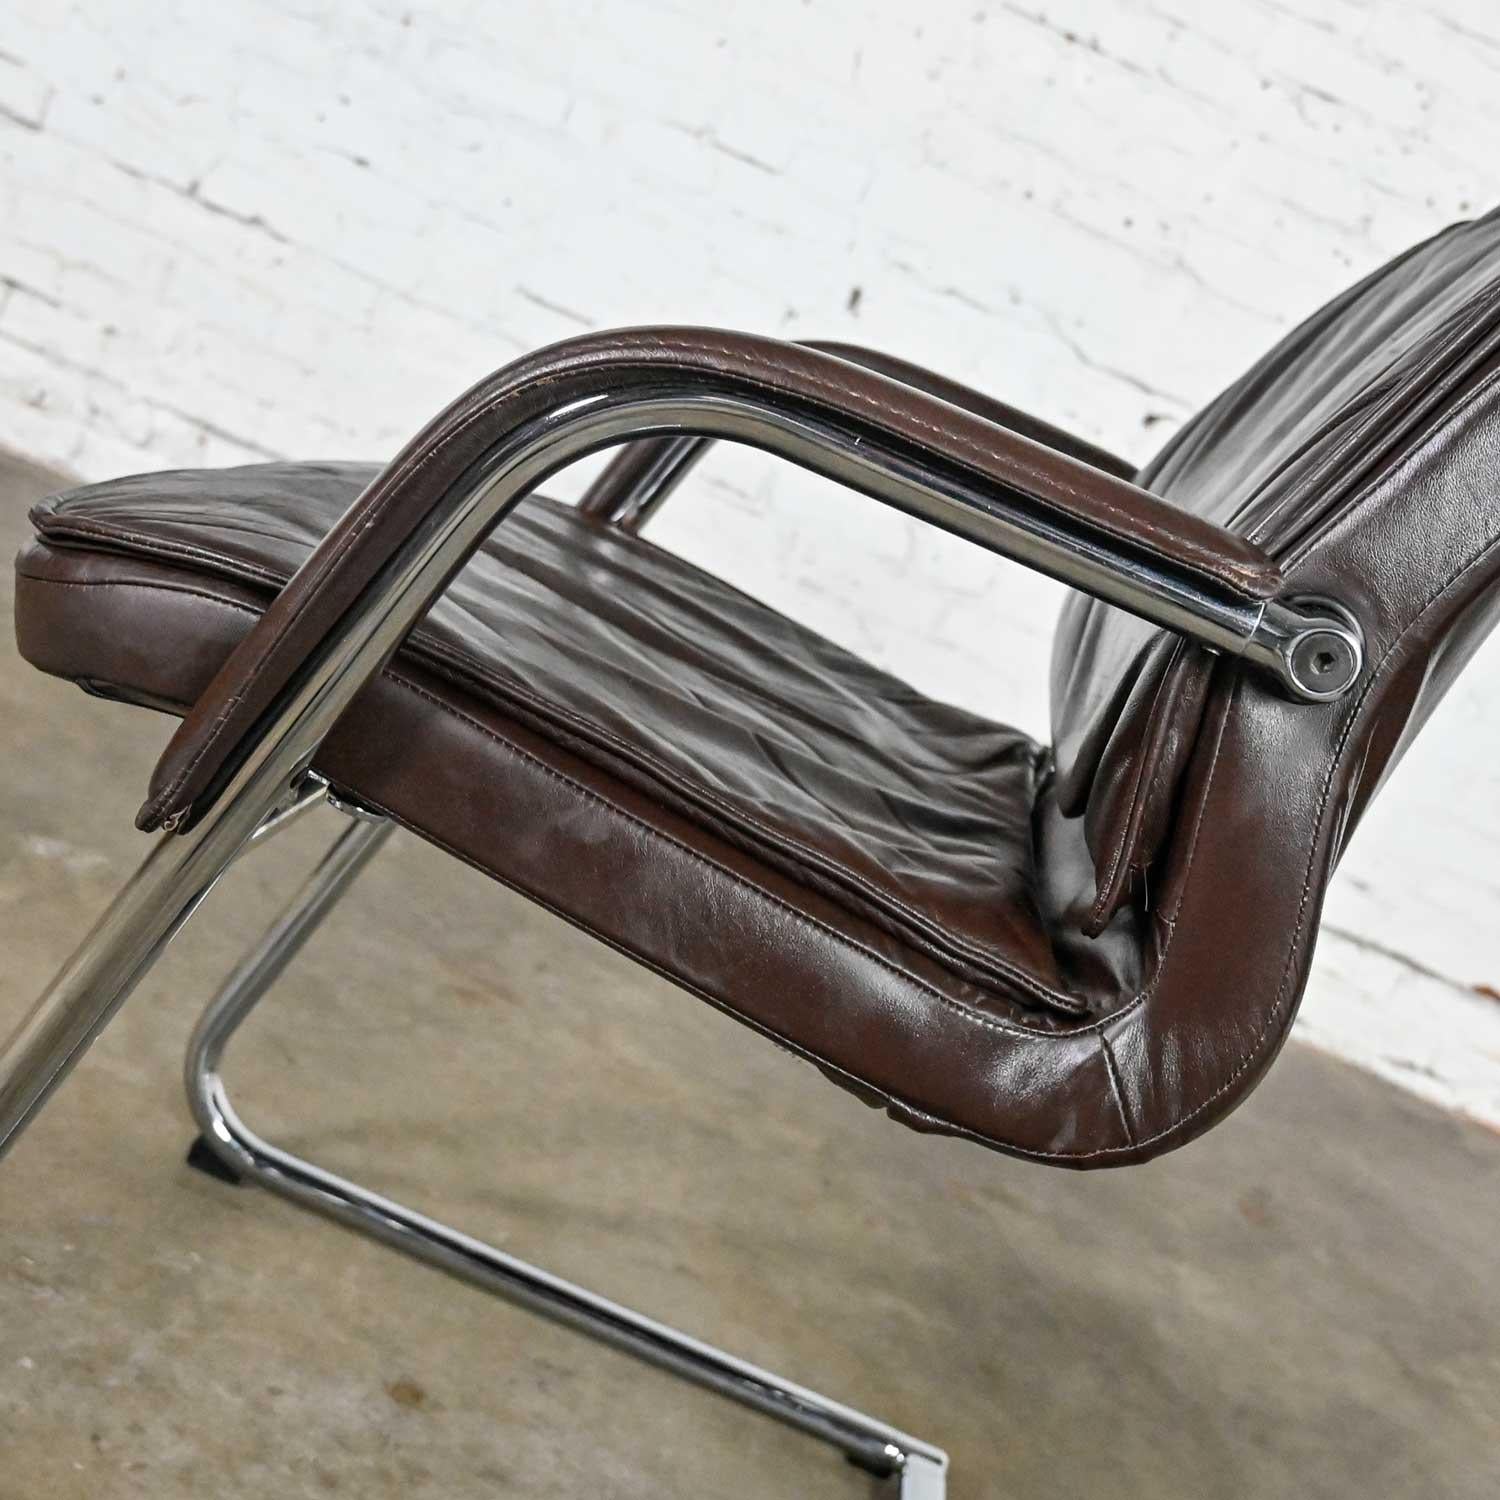 Vintage Modern Vecta Contract Brown Leather & Chrome Cantilever Pair of Chairs For Sale 3